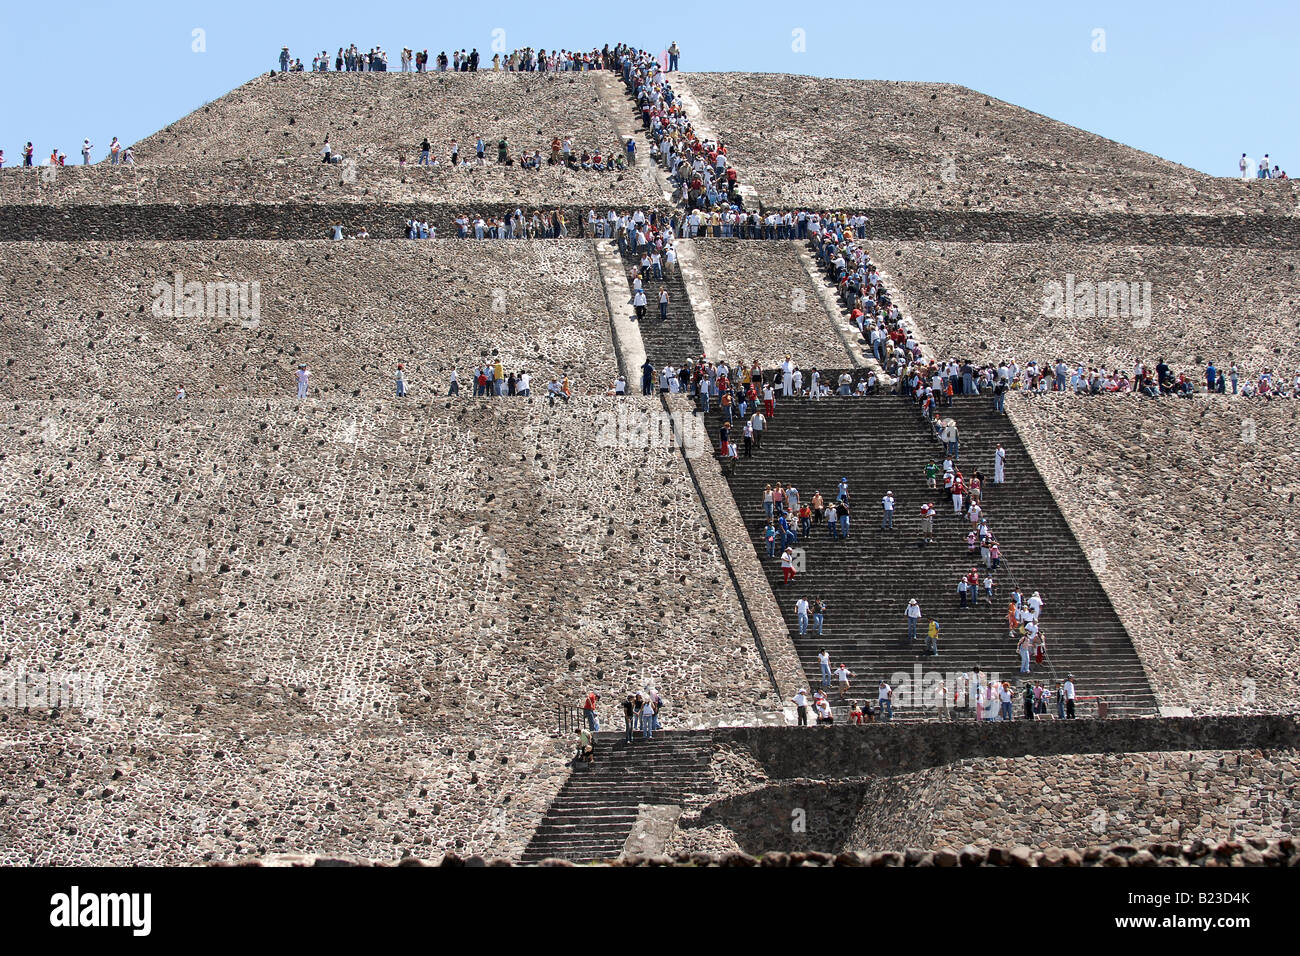 Tourists on pyramid Teotihuacan Mexico Stock Photo - Alamy